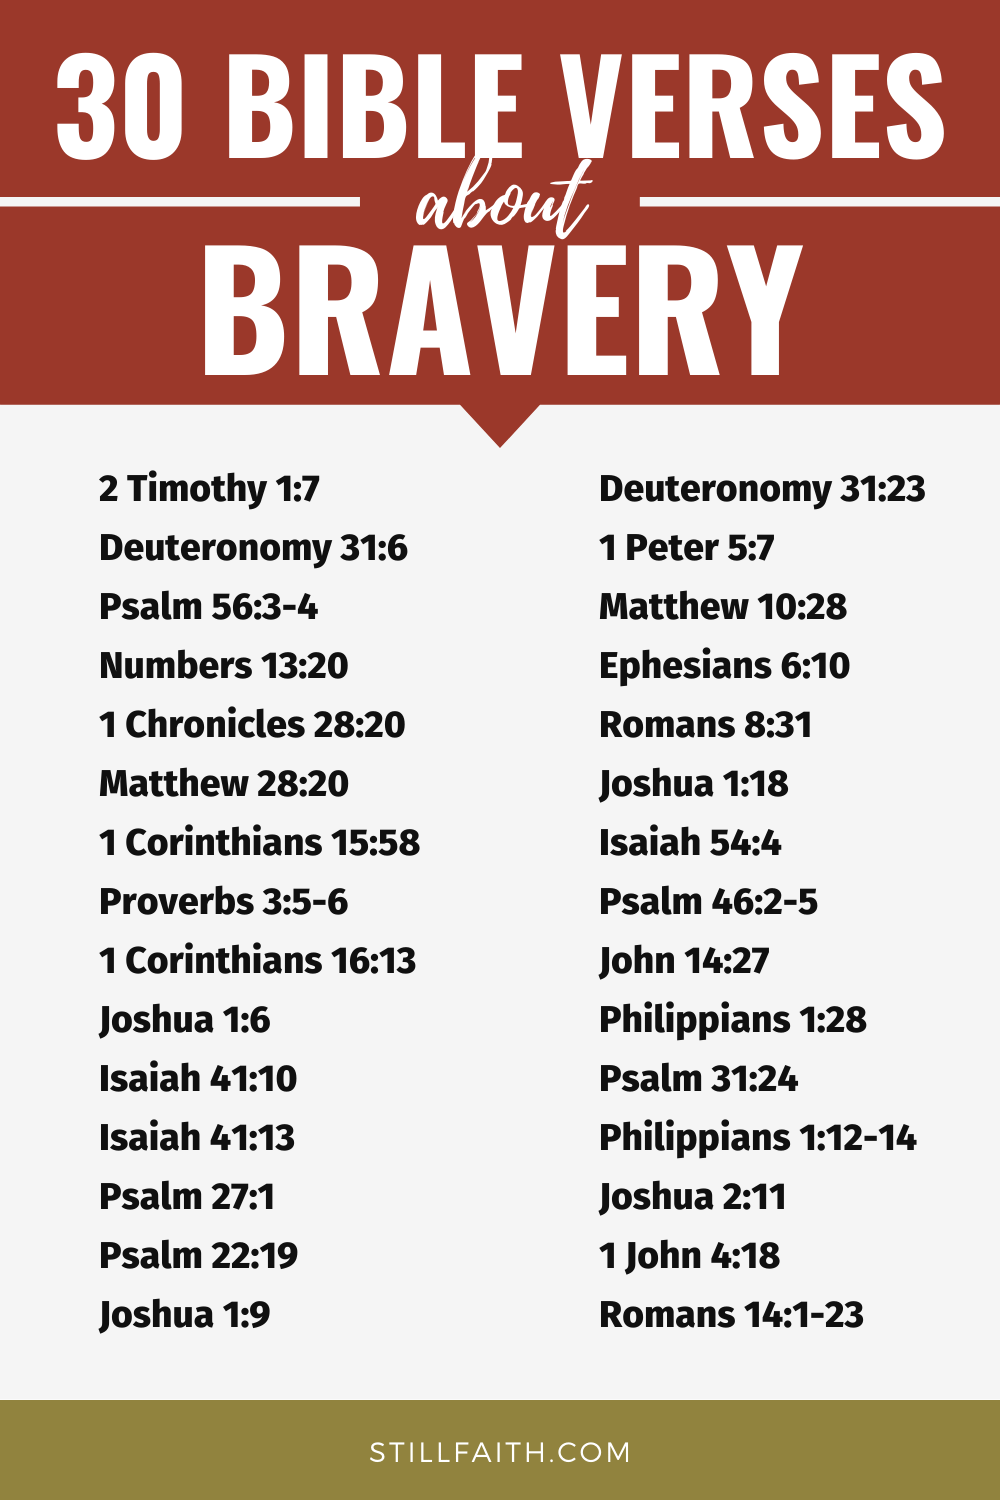 Bible Verses about Bravery